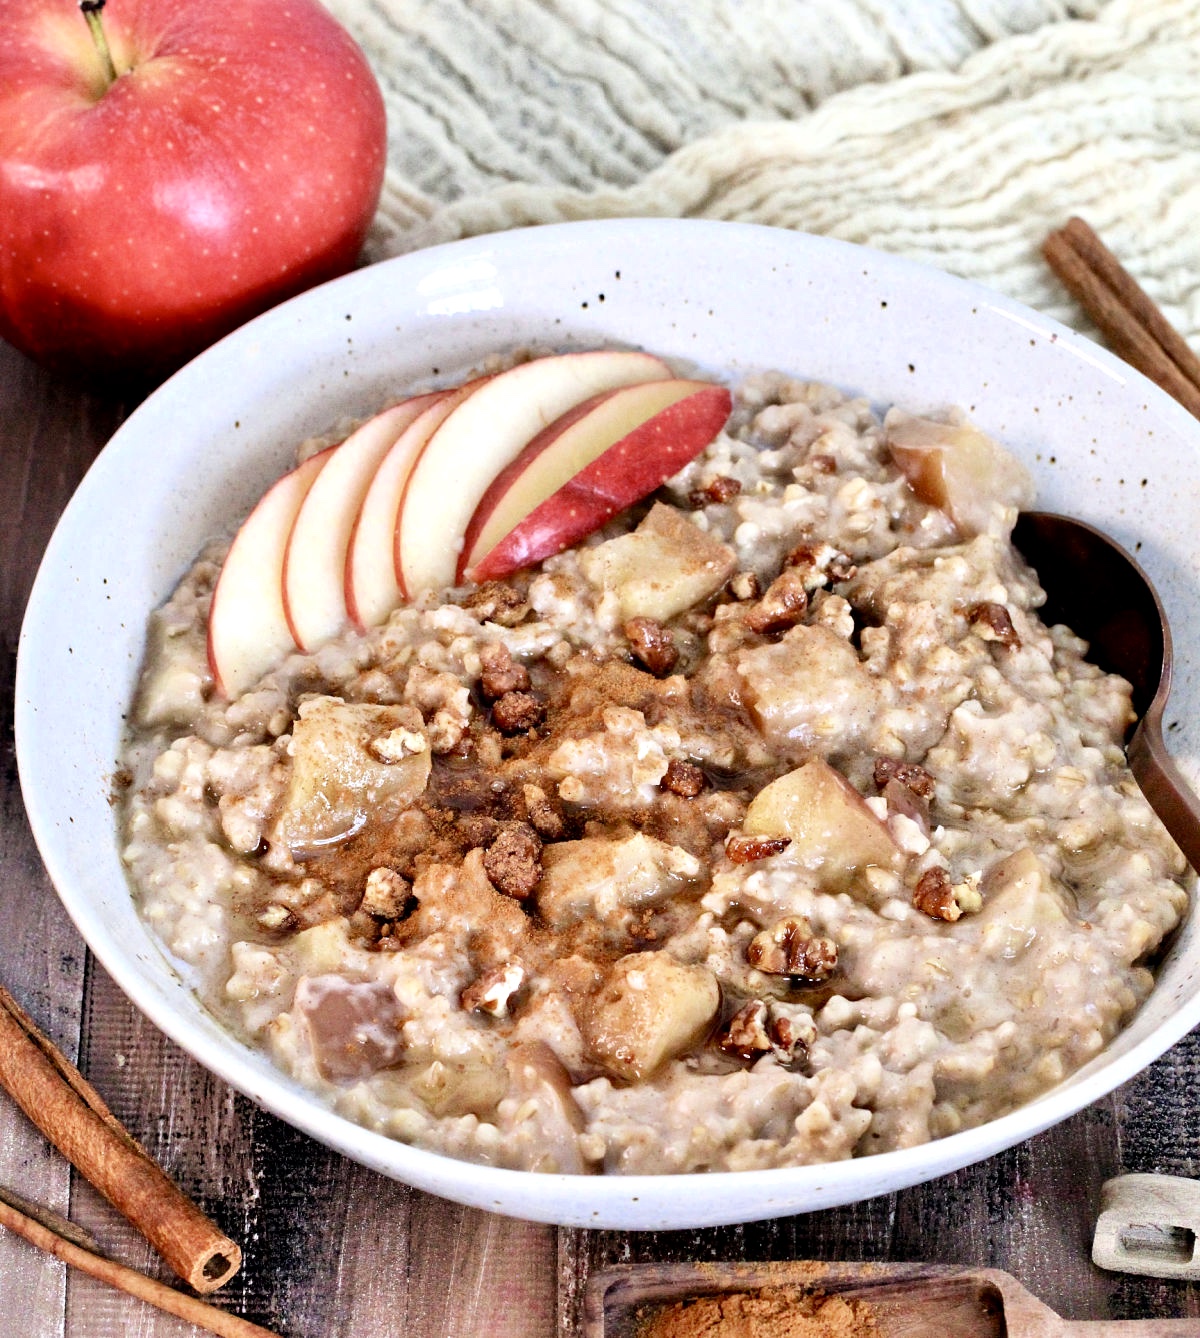 Easy Crockpot Apple Cinnamon Oatmeal in a bowl garnished with apple slices and cinnamon on a wooden board with an apple, cinnamon sticks and measuring spoons around it.